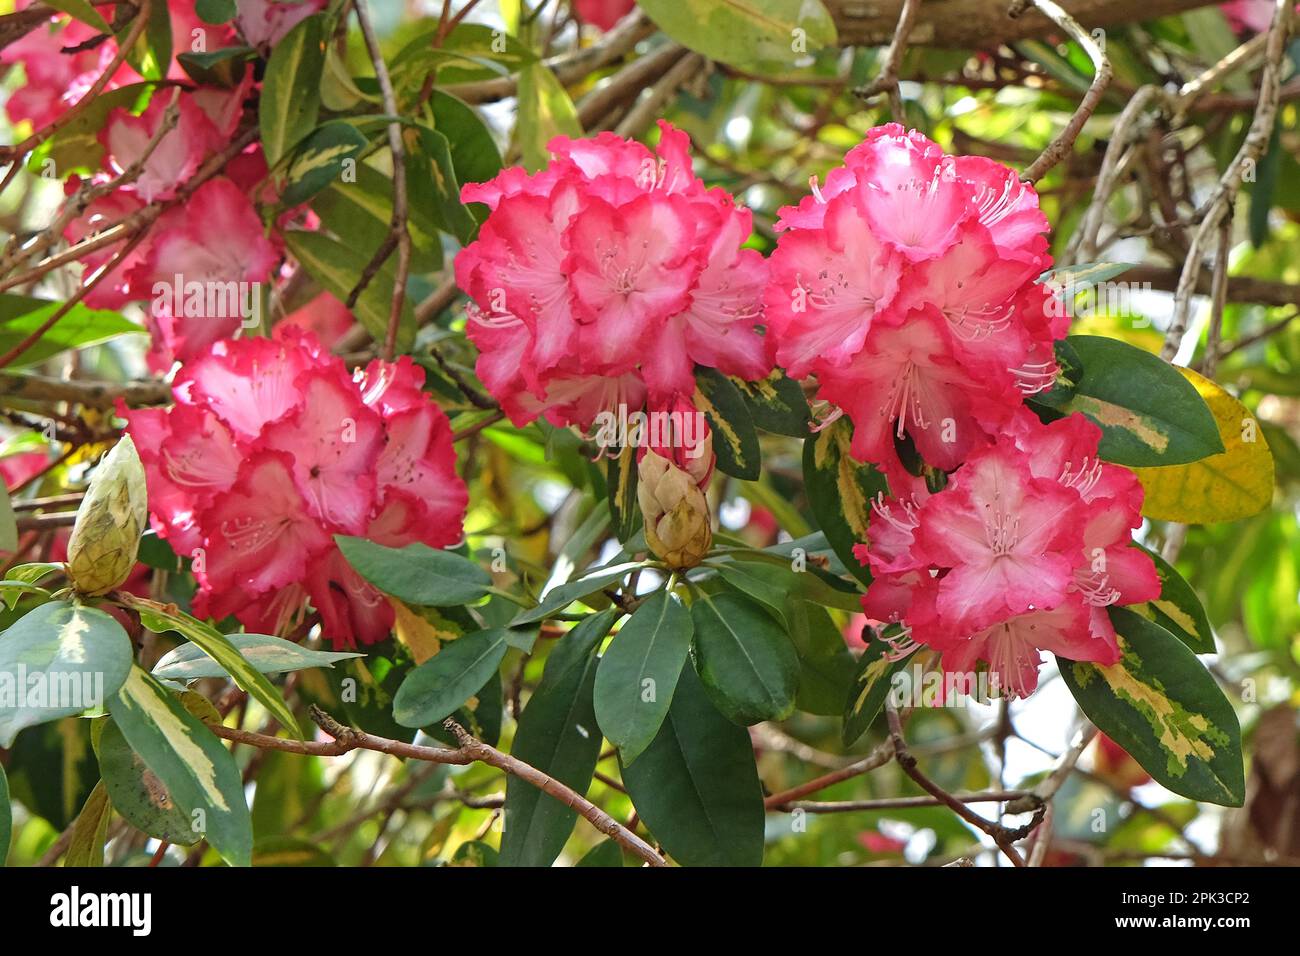 Rhododendron 'President Roosevelt' in flower. Stock Photo